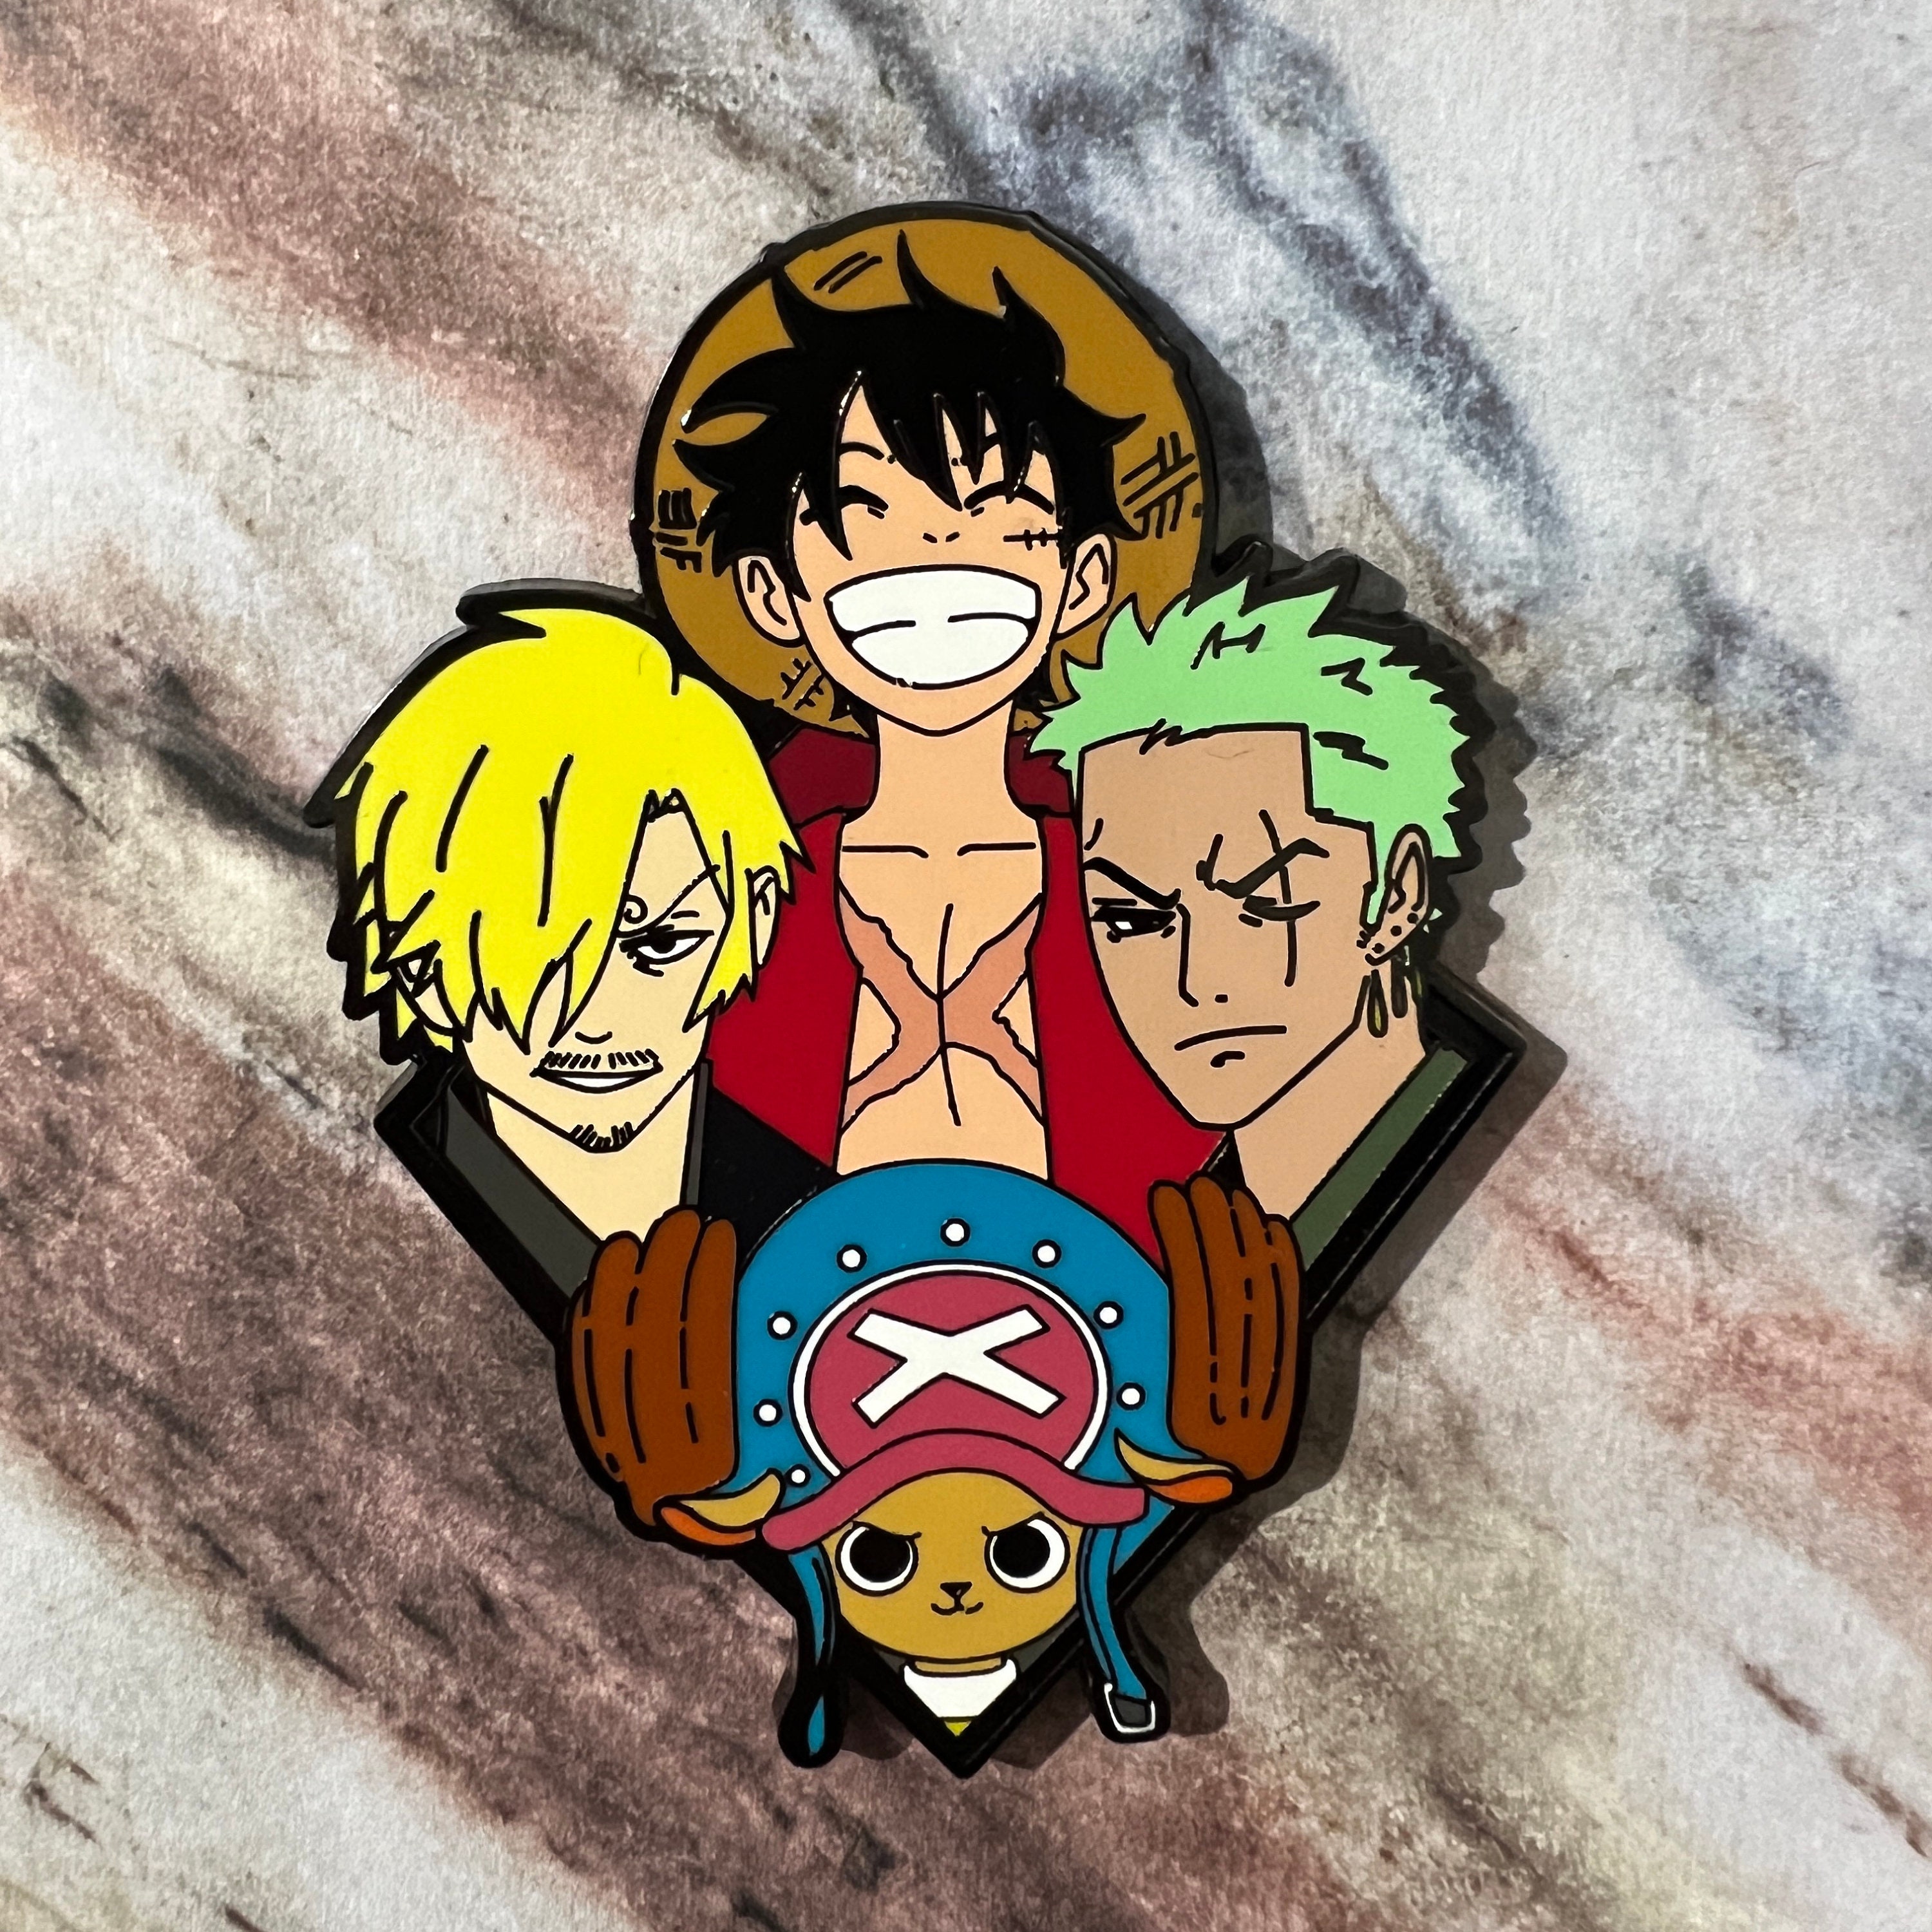 beyond the falls — Some 300x300 ocean!trans Sanji, Law, and Zoro